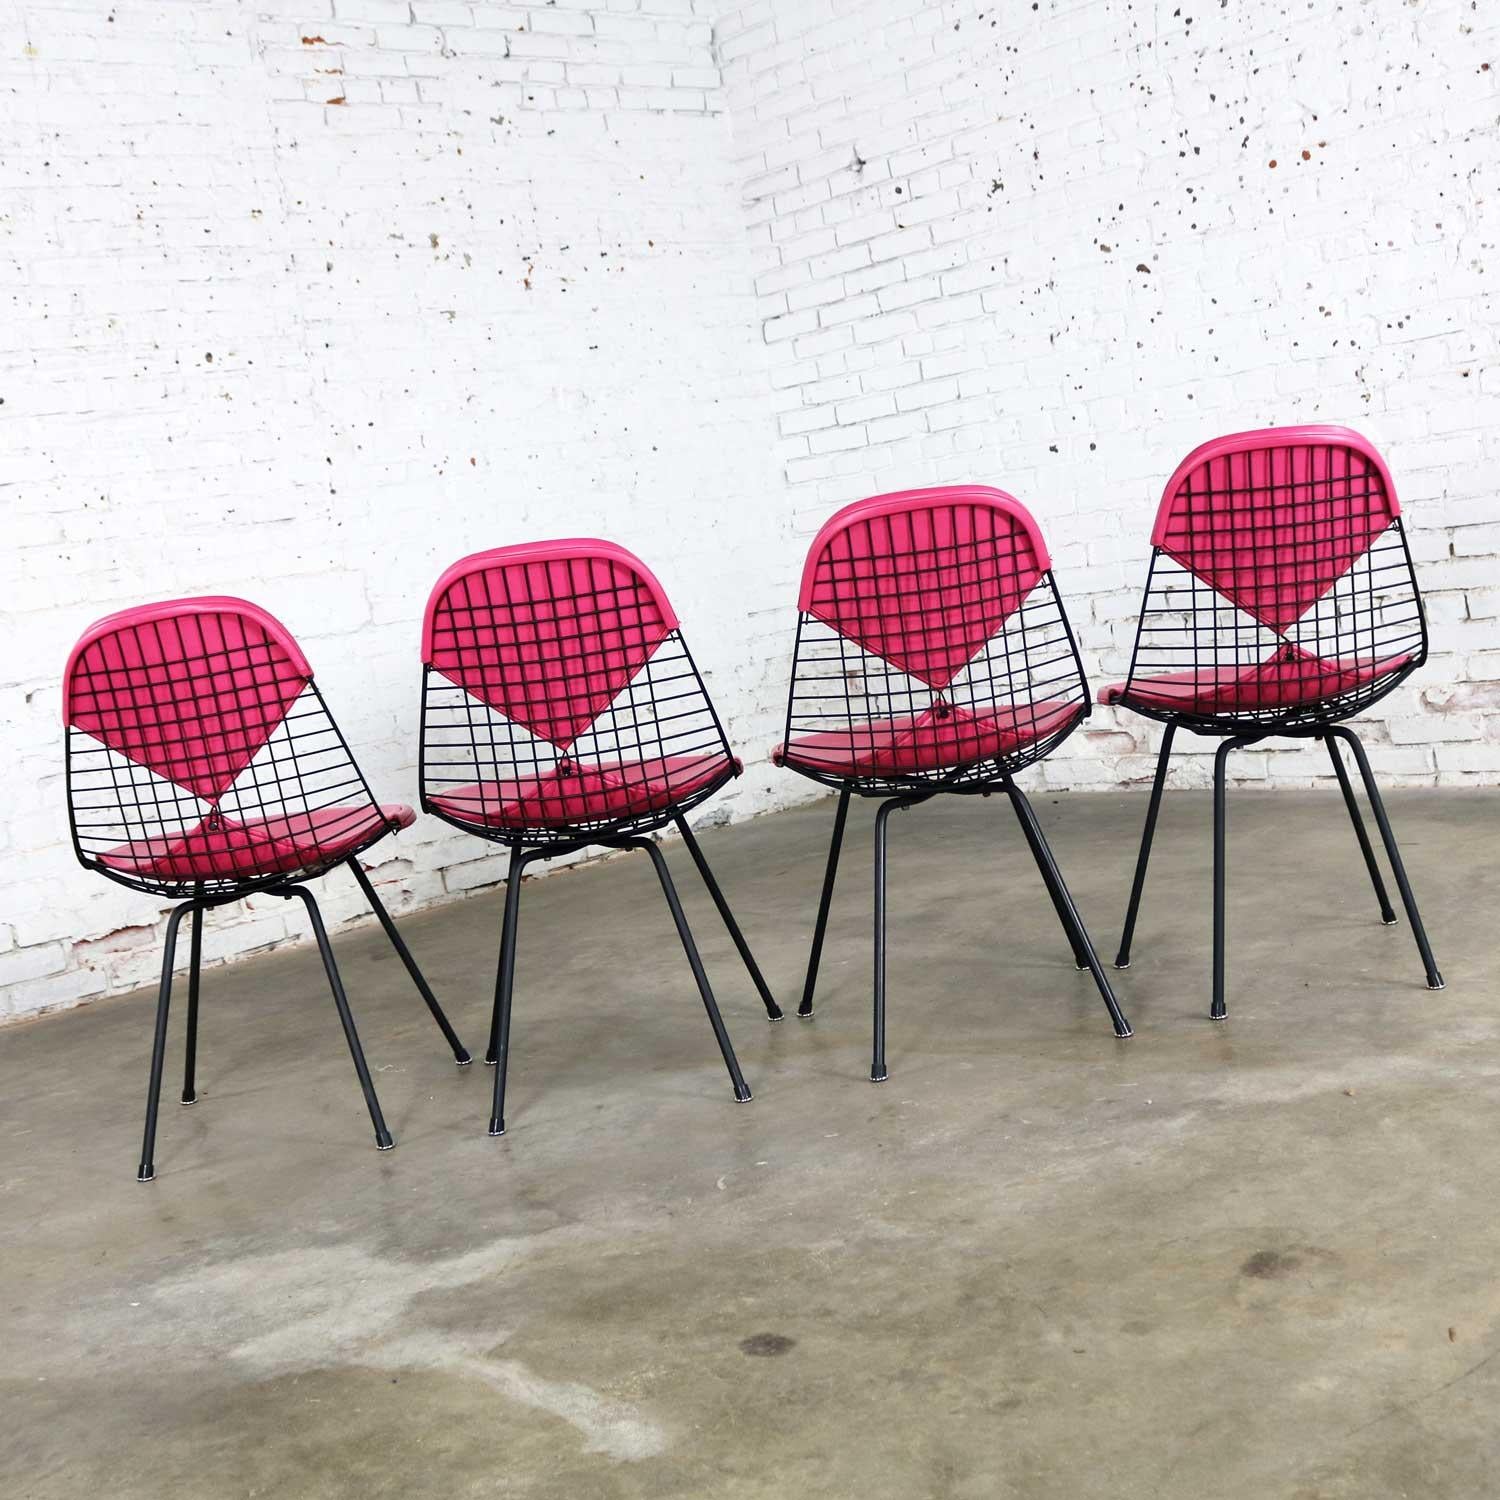 4 DKX-2 Wire Bikini Shell Chairs X Bases Hot Pink Bikinis Eames Herman Miller In Good Condition For Sale In Topeka, KS